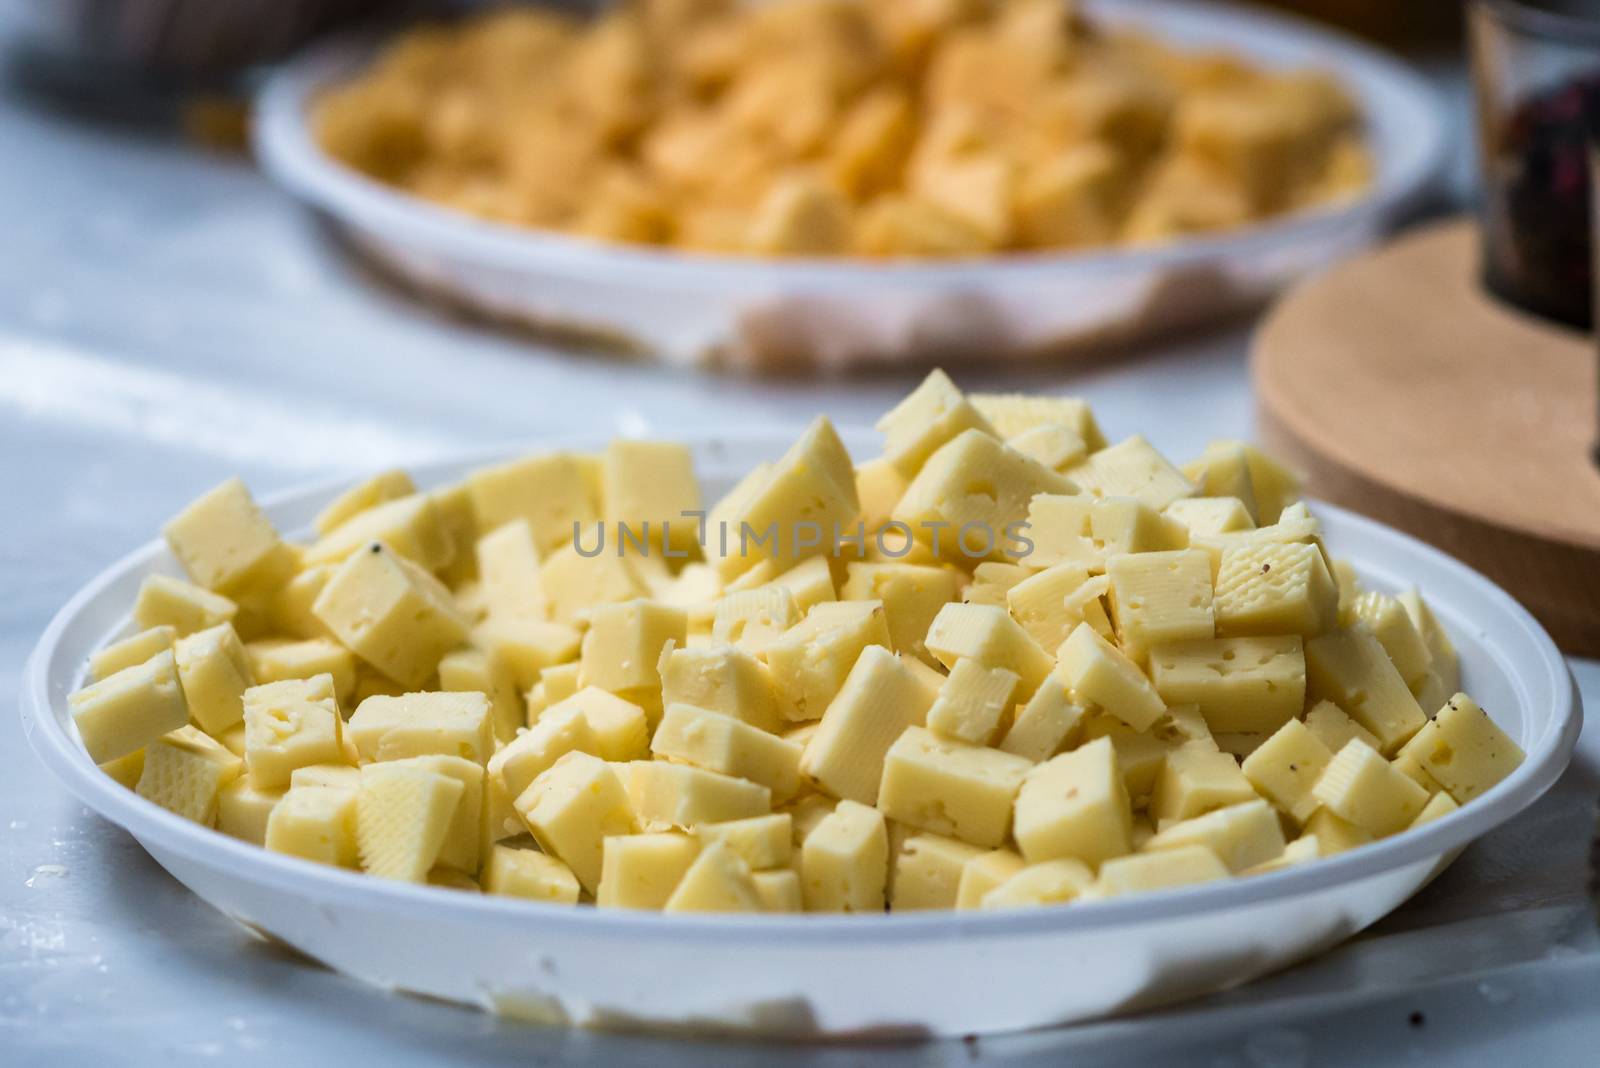 diced hard cheese on a white plastic plate at the exhibition